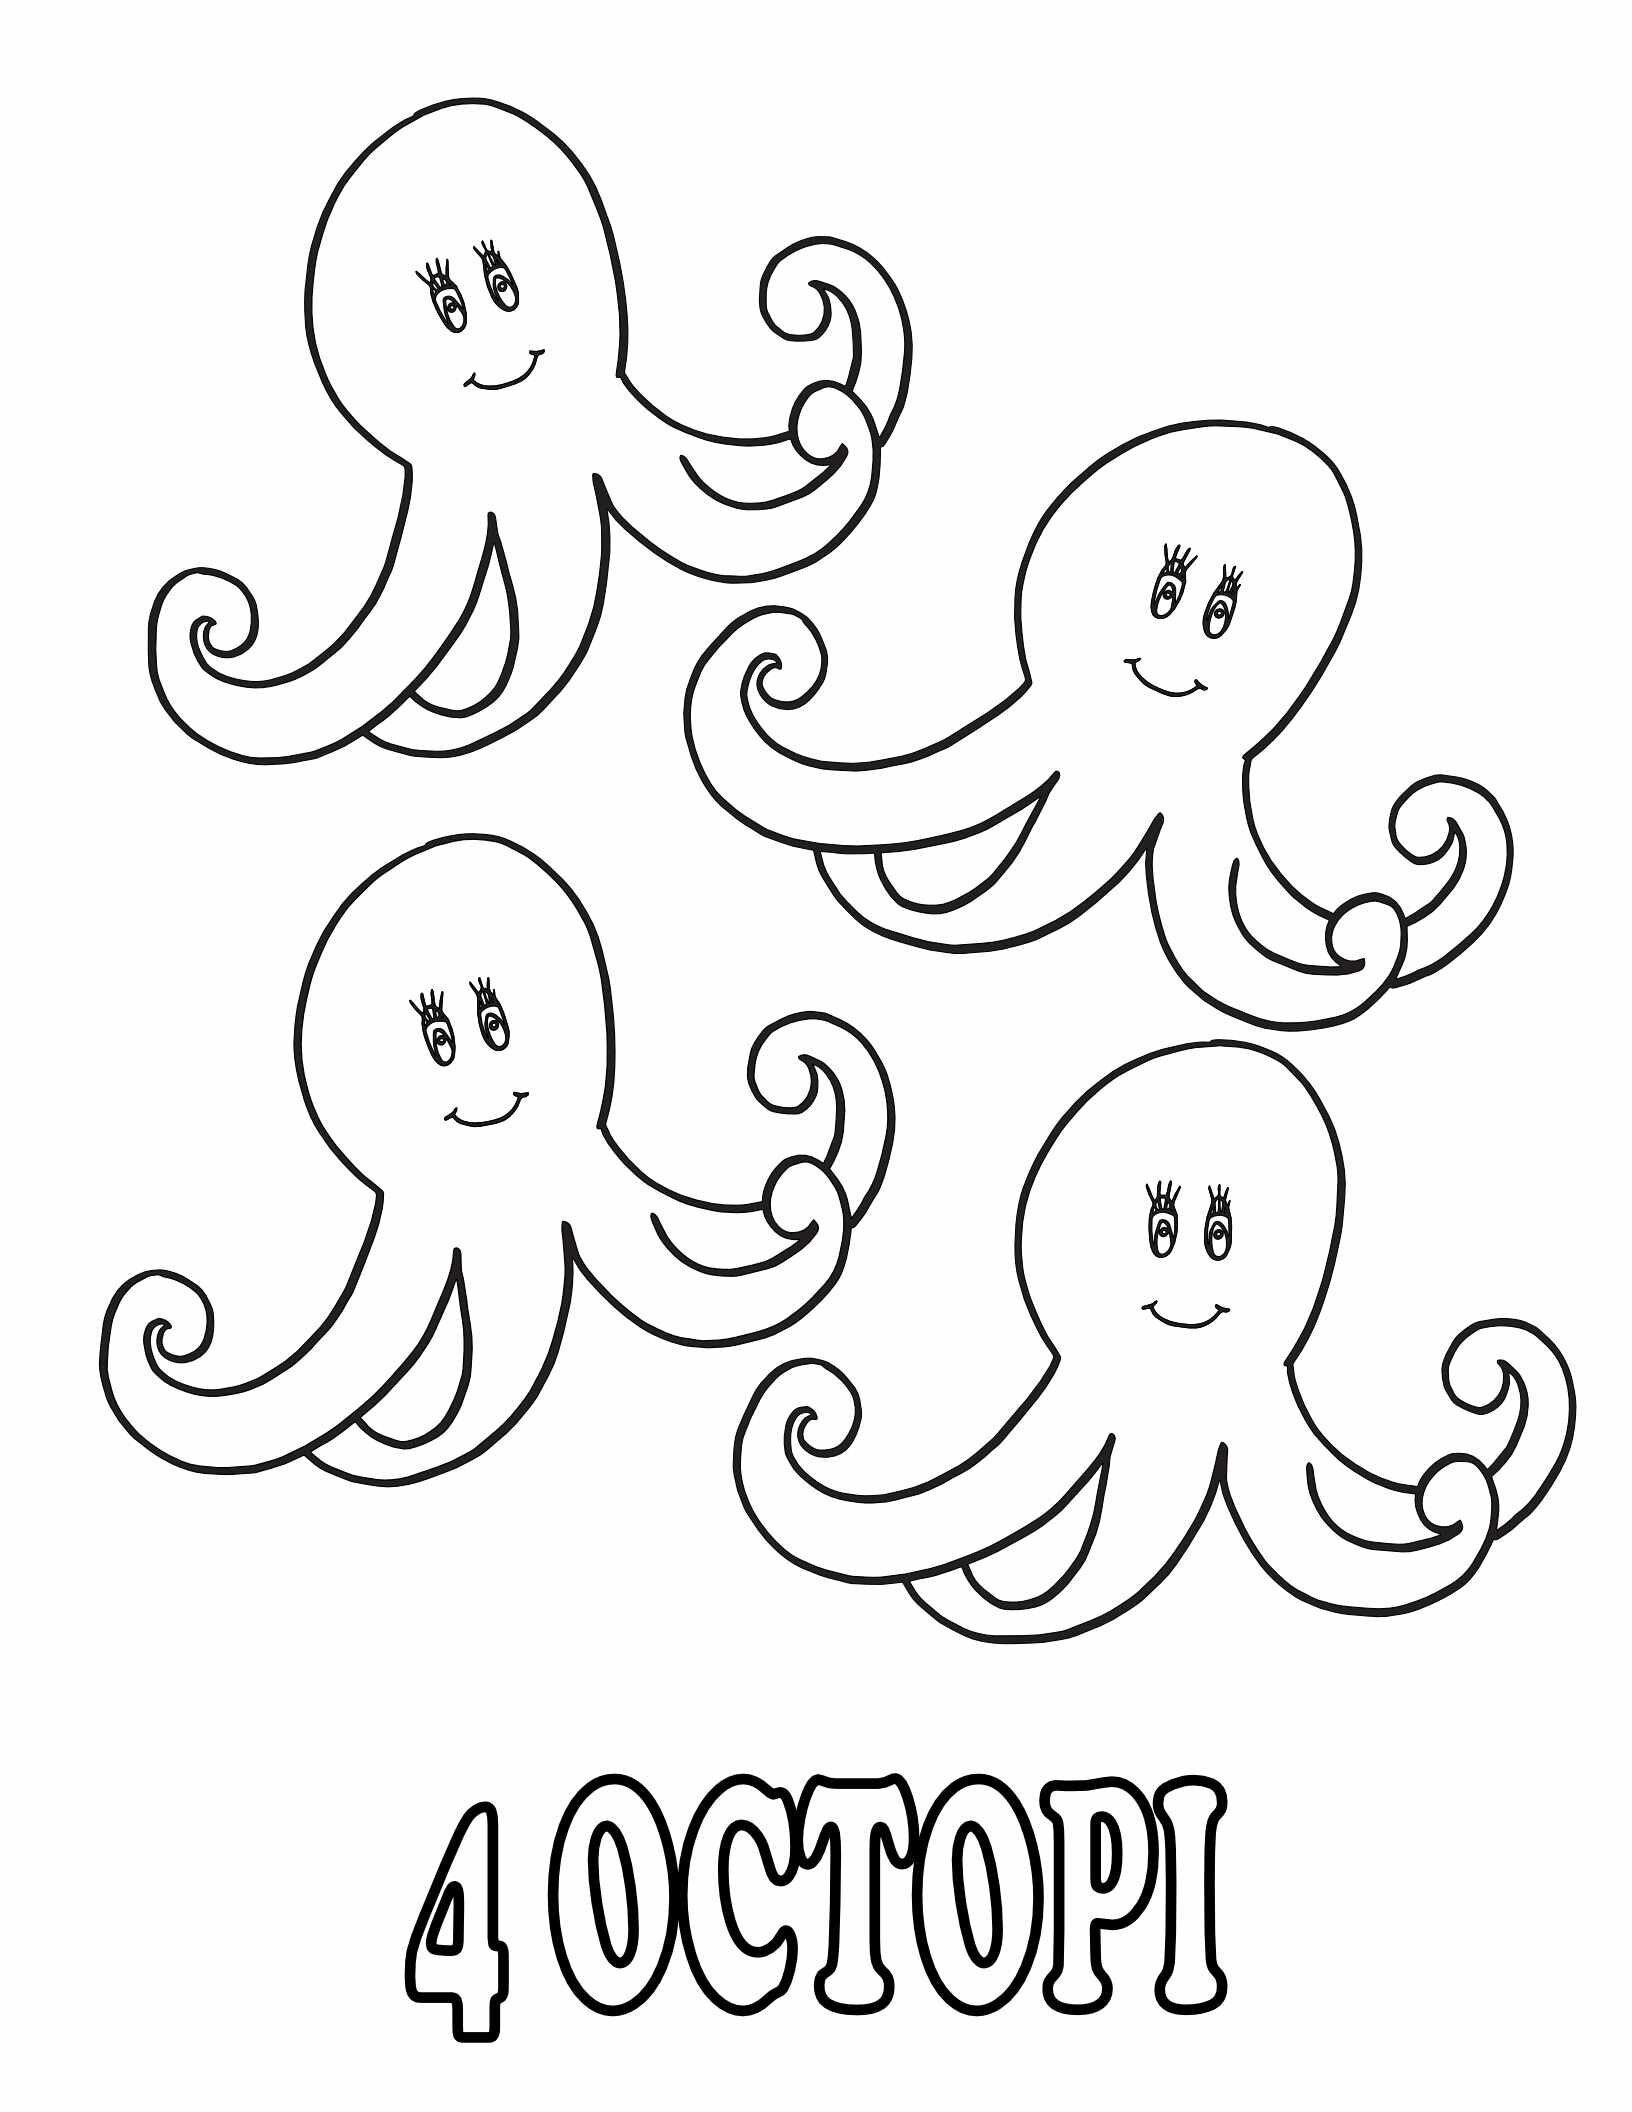 10 Free Animal Number Coloring Pages -  4 Octopi